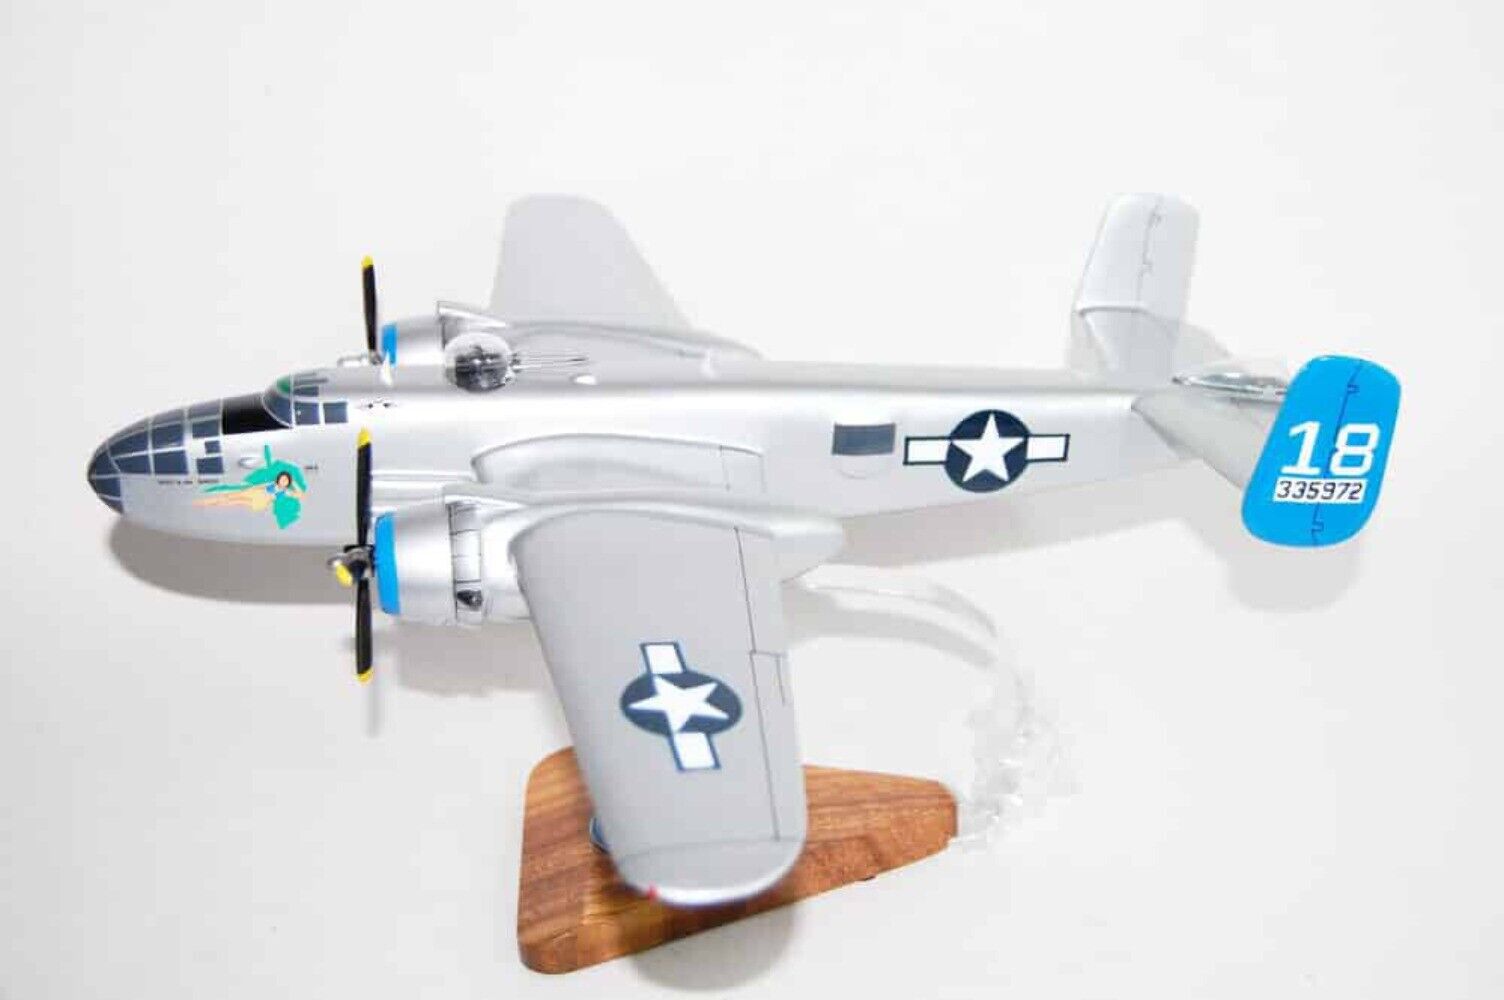 “Maid in the Shade” North American B-25 Mitchell Model, 1/45th Scale, Mahogany